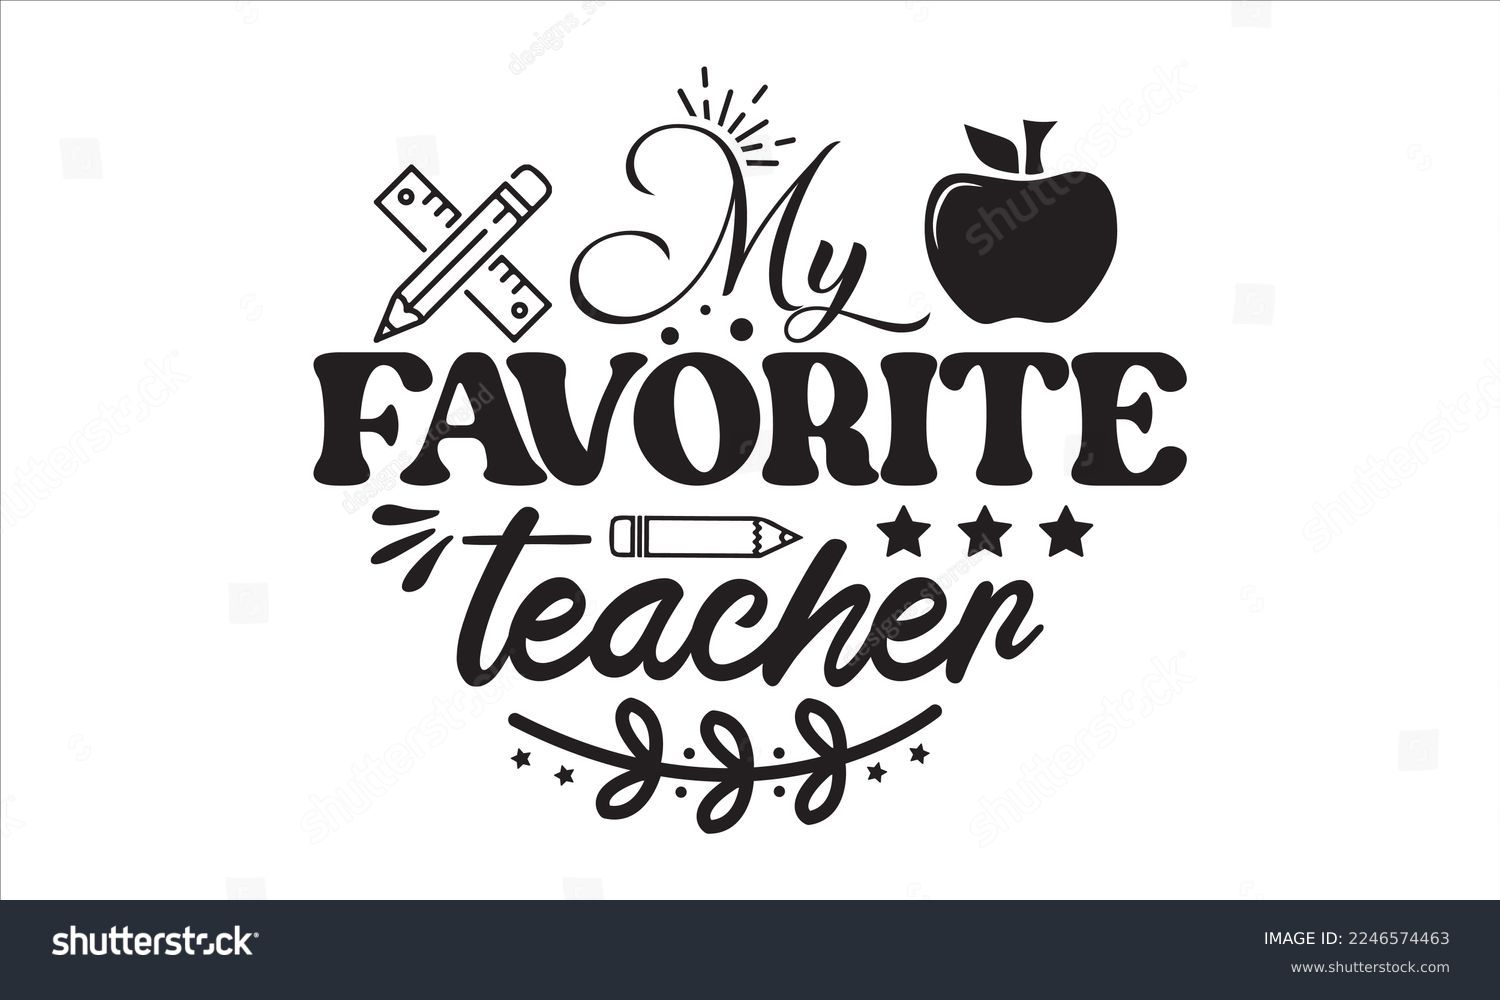 SVG of My favorite teacher Svg, Teacher SVG, Teacher SVG t-shirt design, Hand drawn lettering phrases, templet, Calligraphy graphic design, SVG Files for Cutting Cricut and Silhouette svg